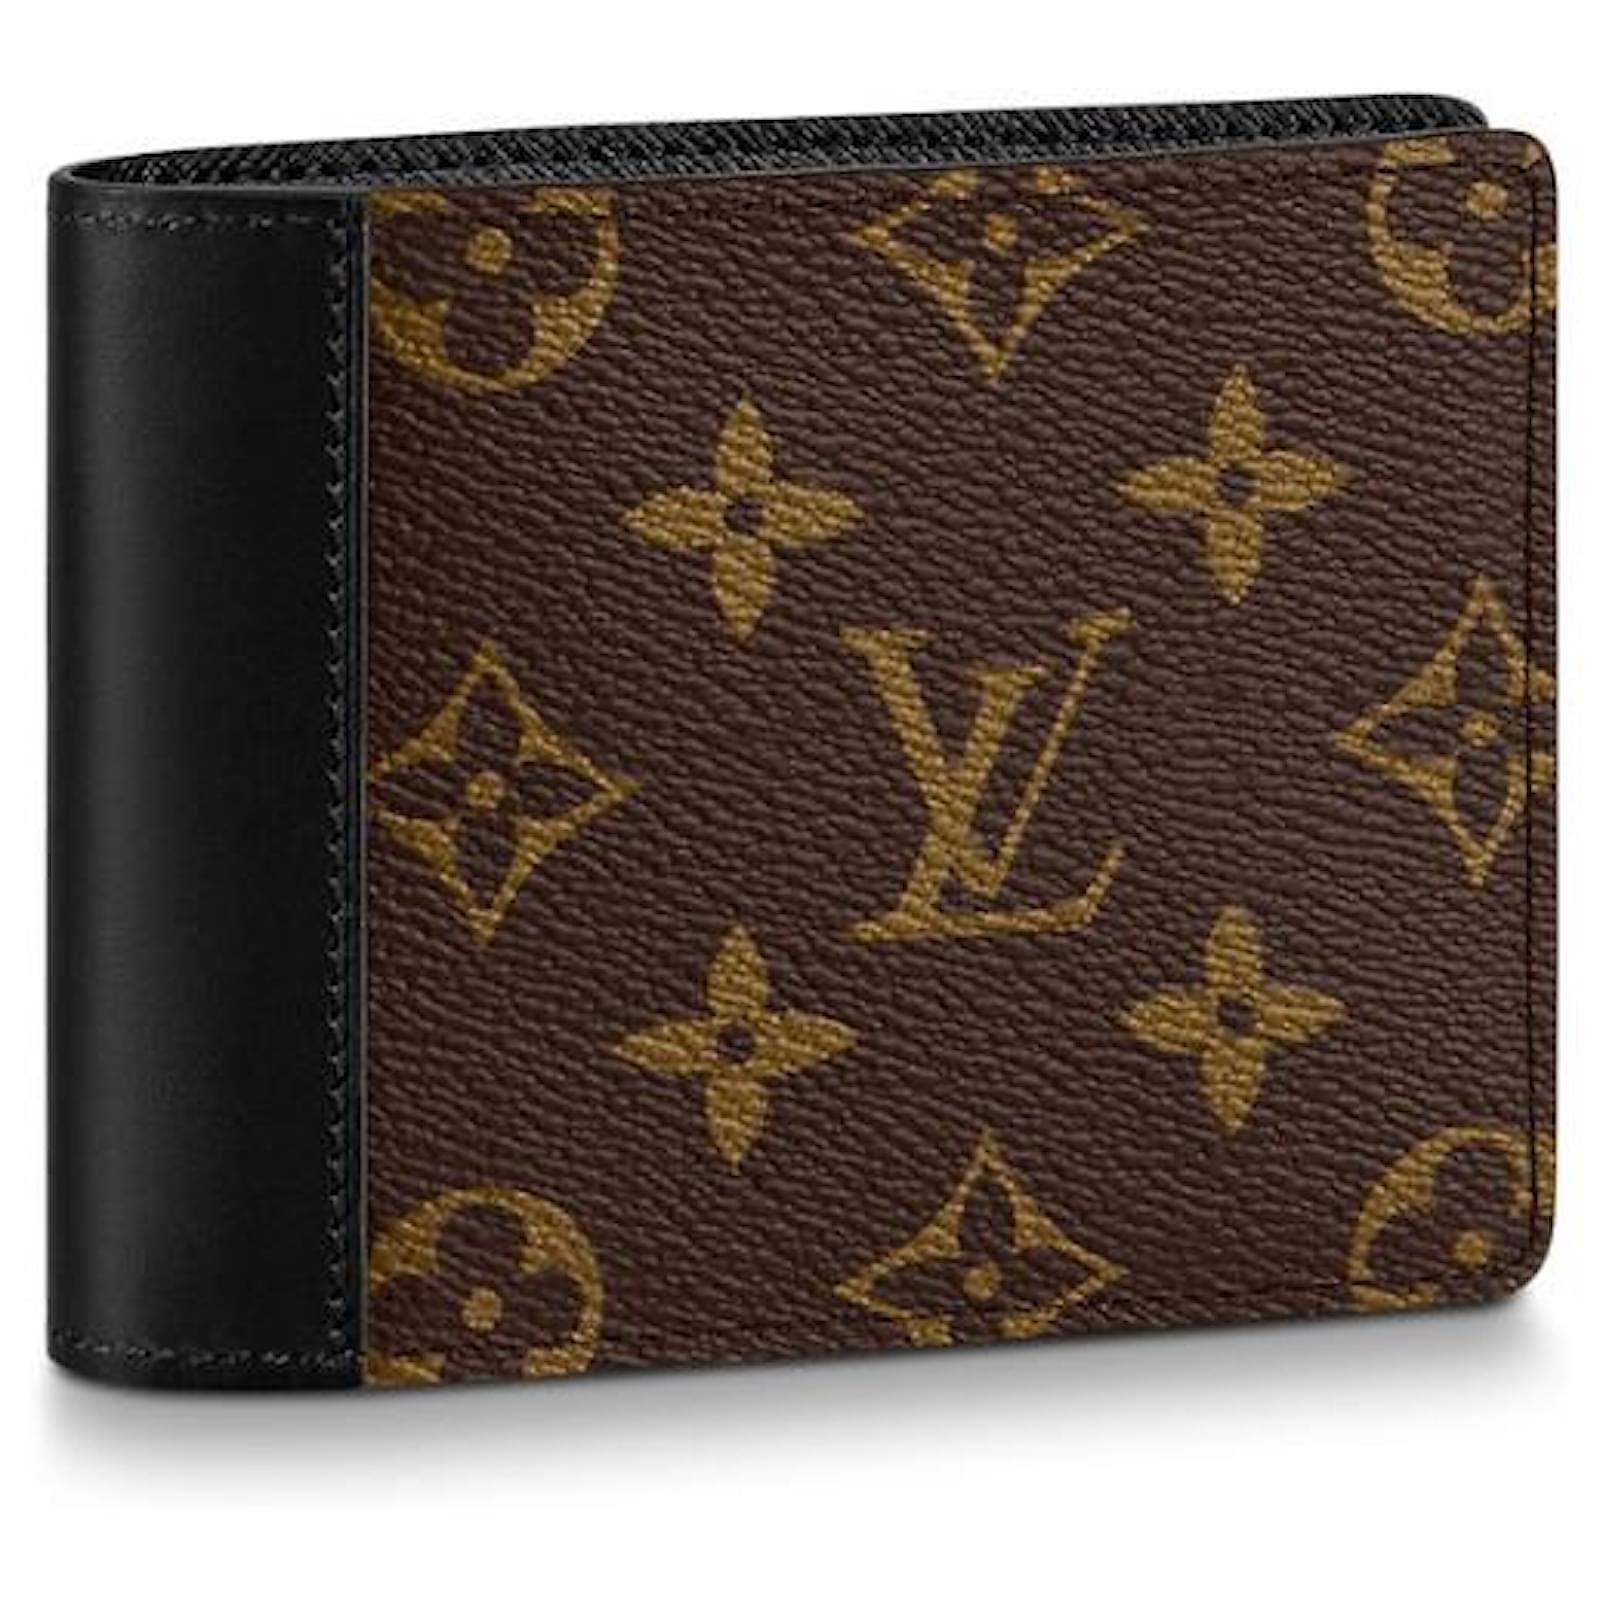 Pin by Helena on Bags  Bags designer fashion, Lv wallet, Louis